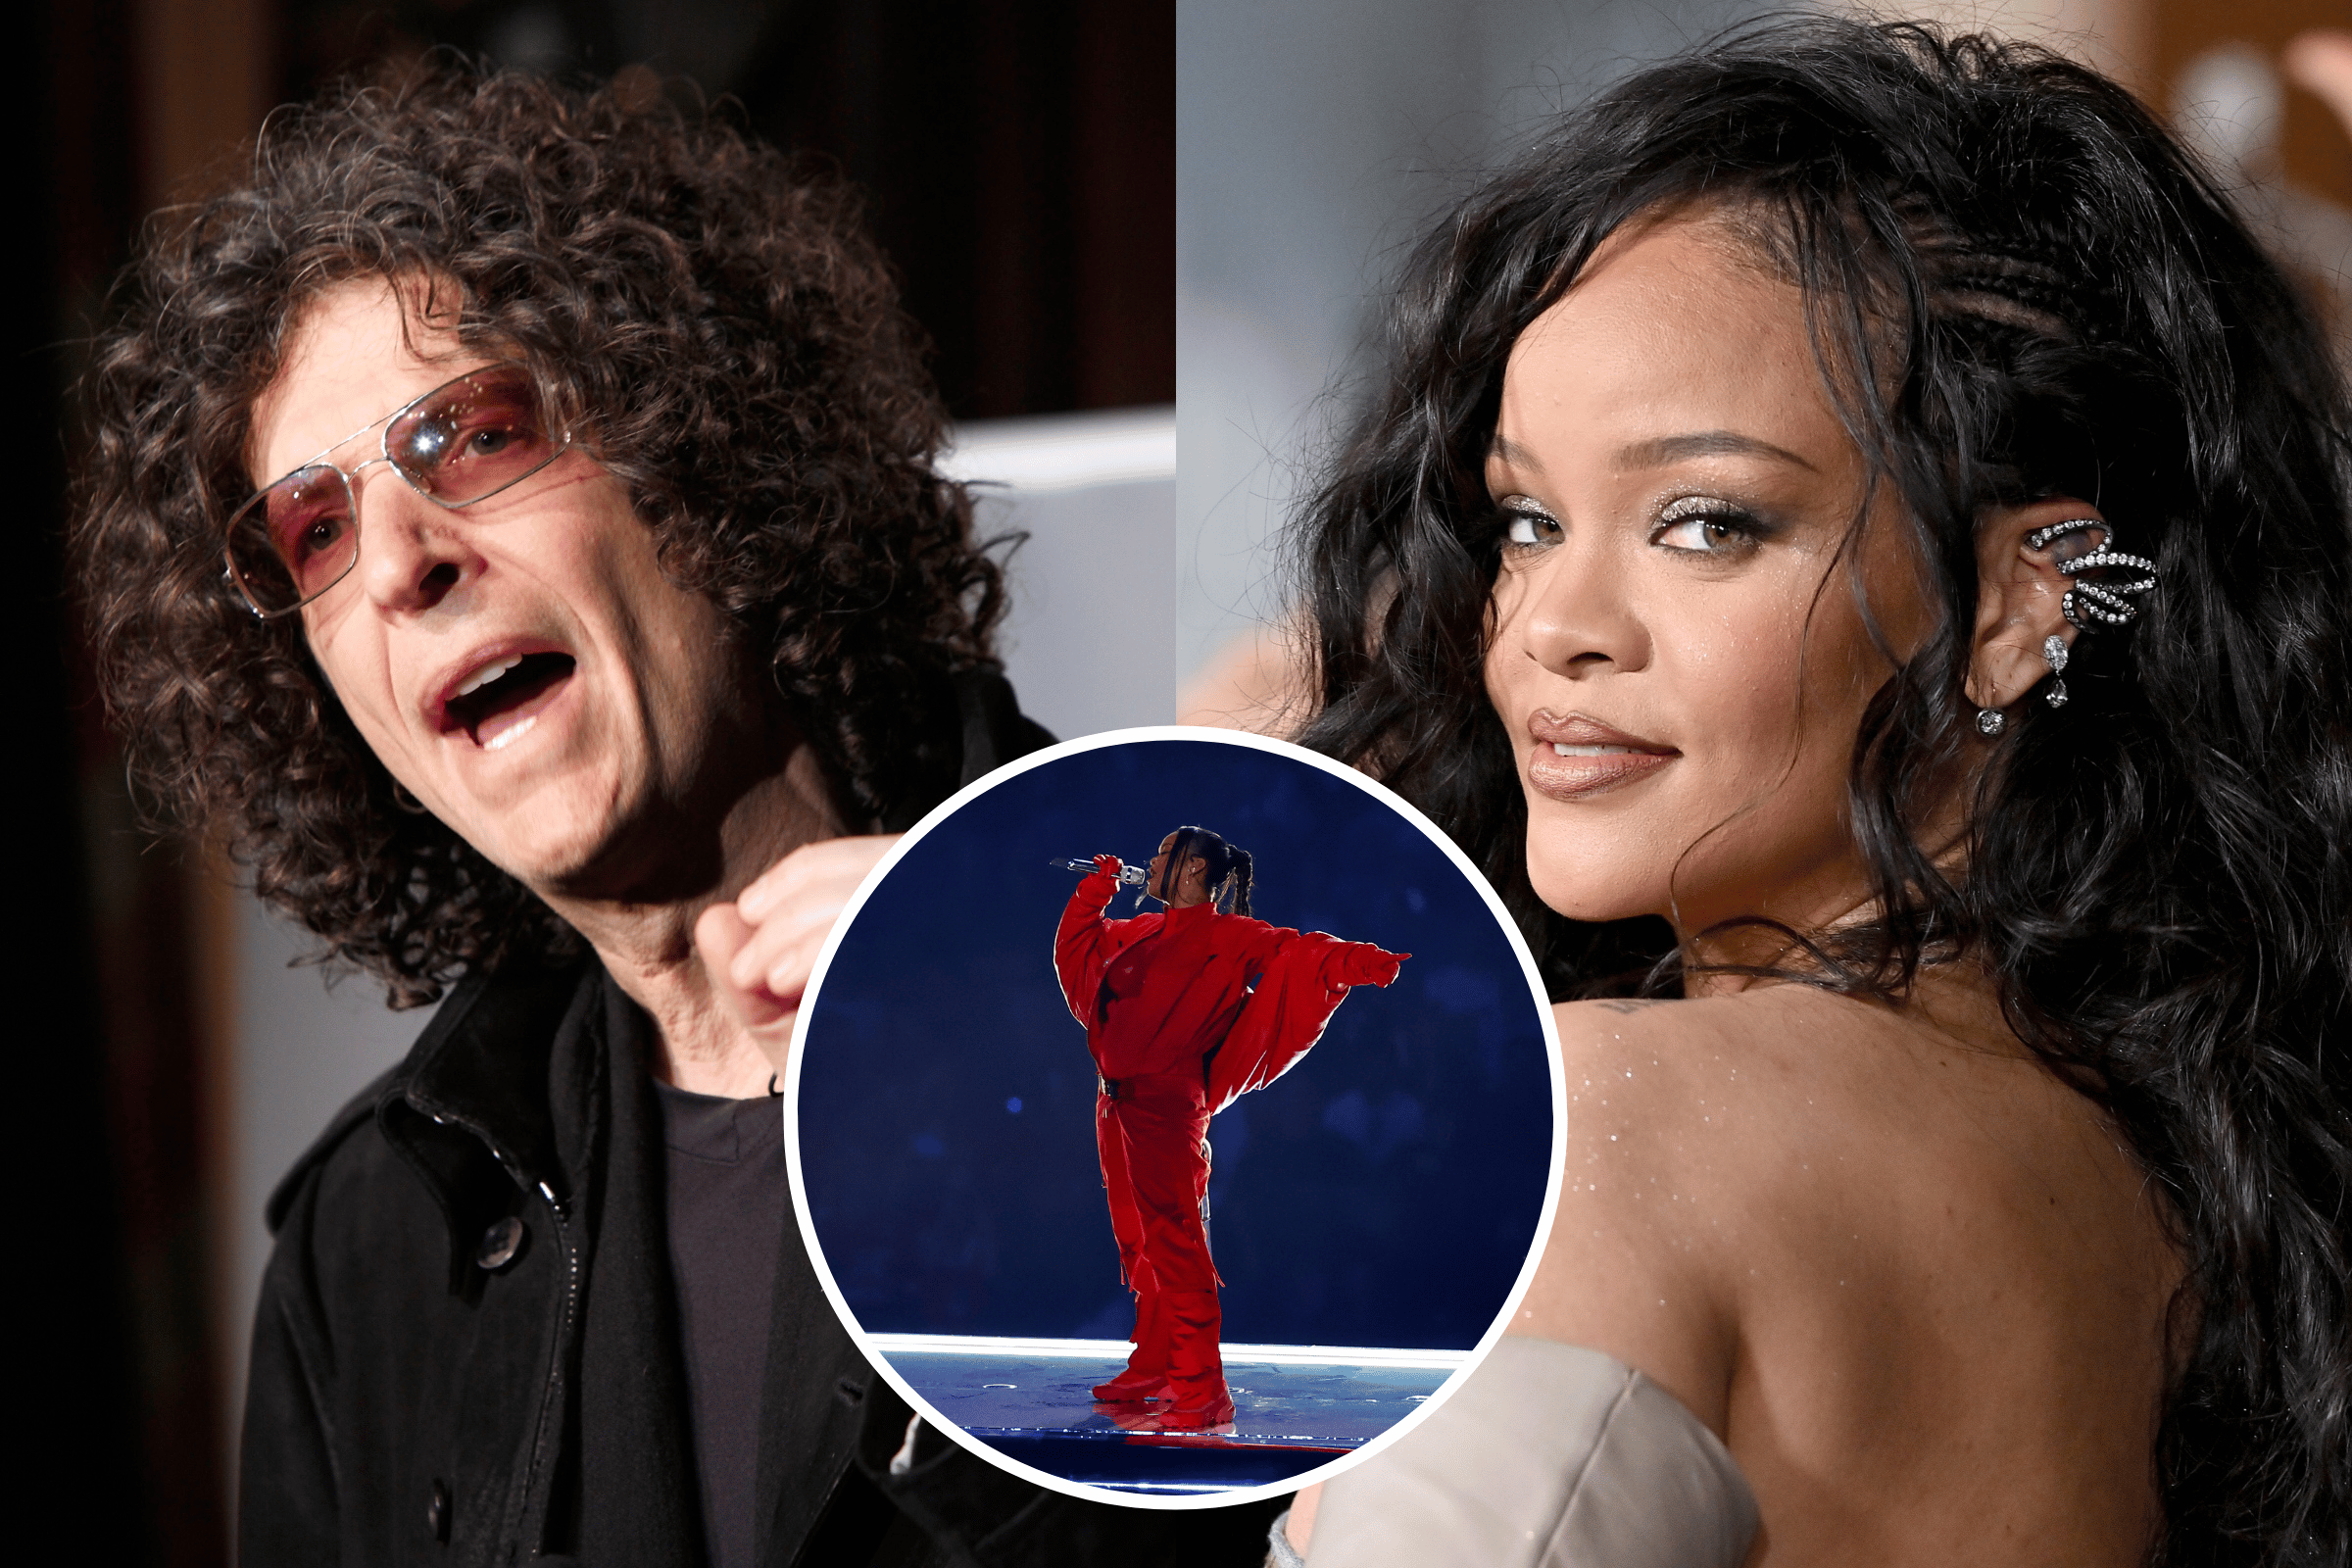 cora jordan recommends howard stern just wrong pic